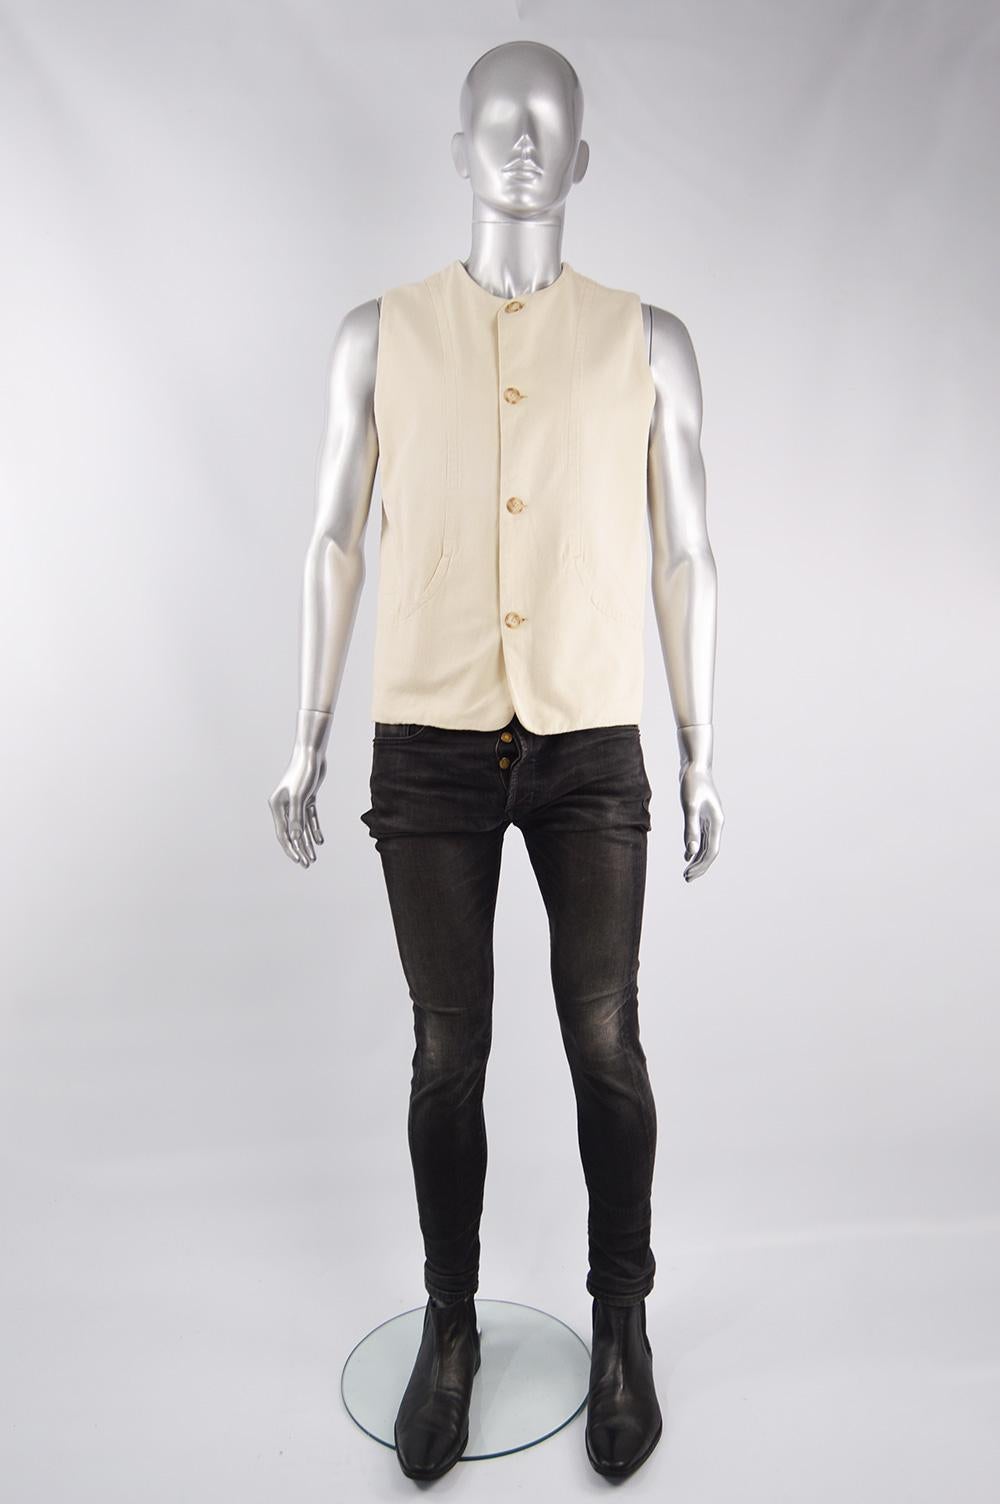 A stylish vintage men's Joseph Homme waistcoat from the late 80s in a beige double sided woven cotton with a round neck and 4 button fastening which gives a minimalist feel. 

Size: Marked M
Chest - 40” / 101cm
Waist - 36” / 91cm
Length (Shoulder to